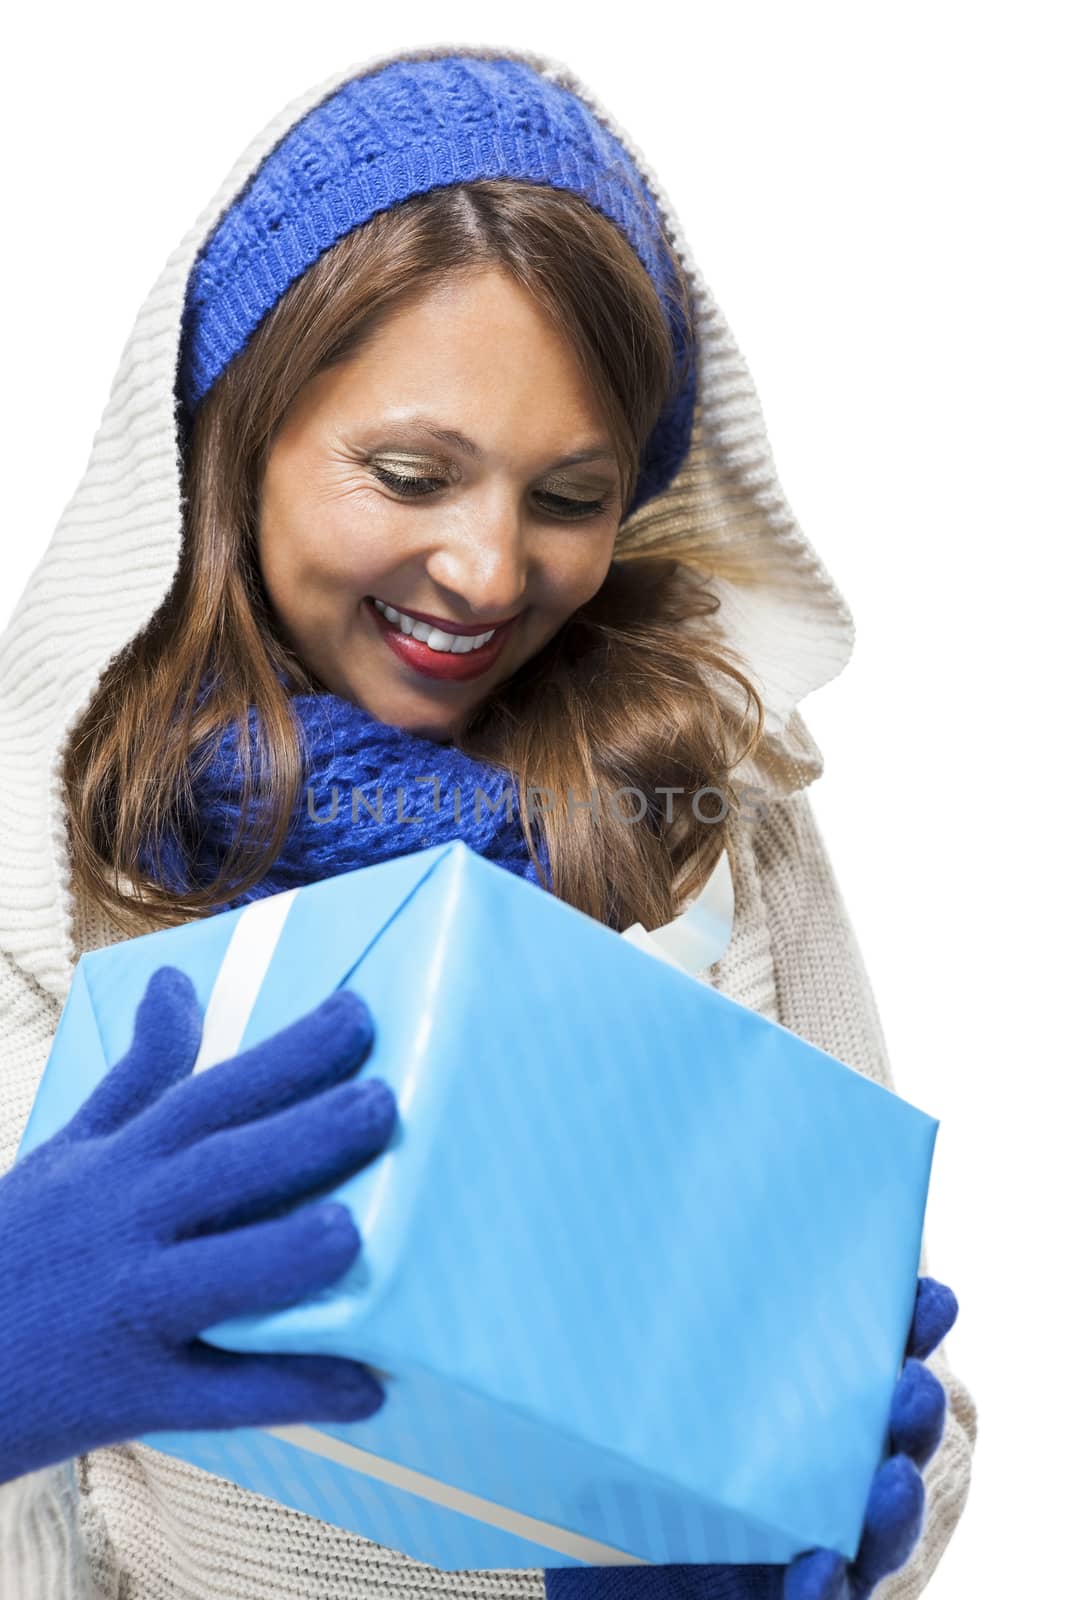 Young woman in fashionable blue knitted winter fashion accessories holding a matching blue gift in her hands looking down at it with a pleased smile, isolated on white